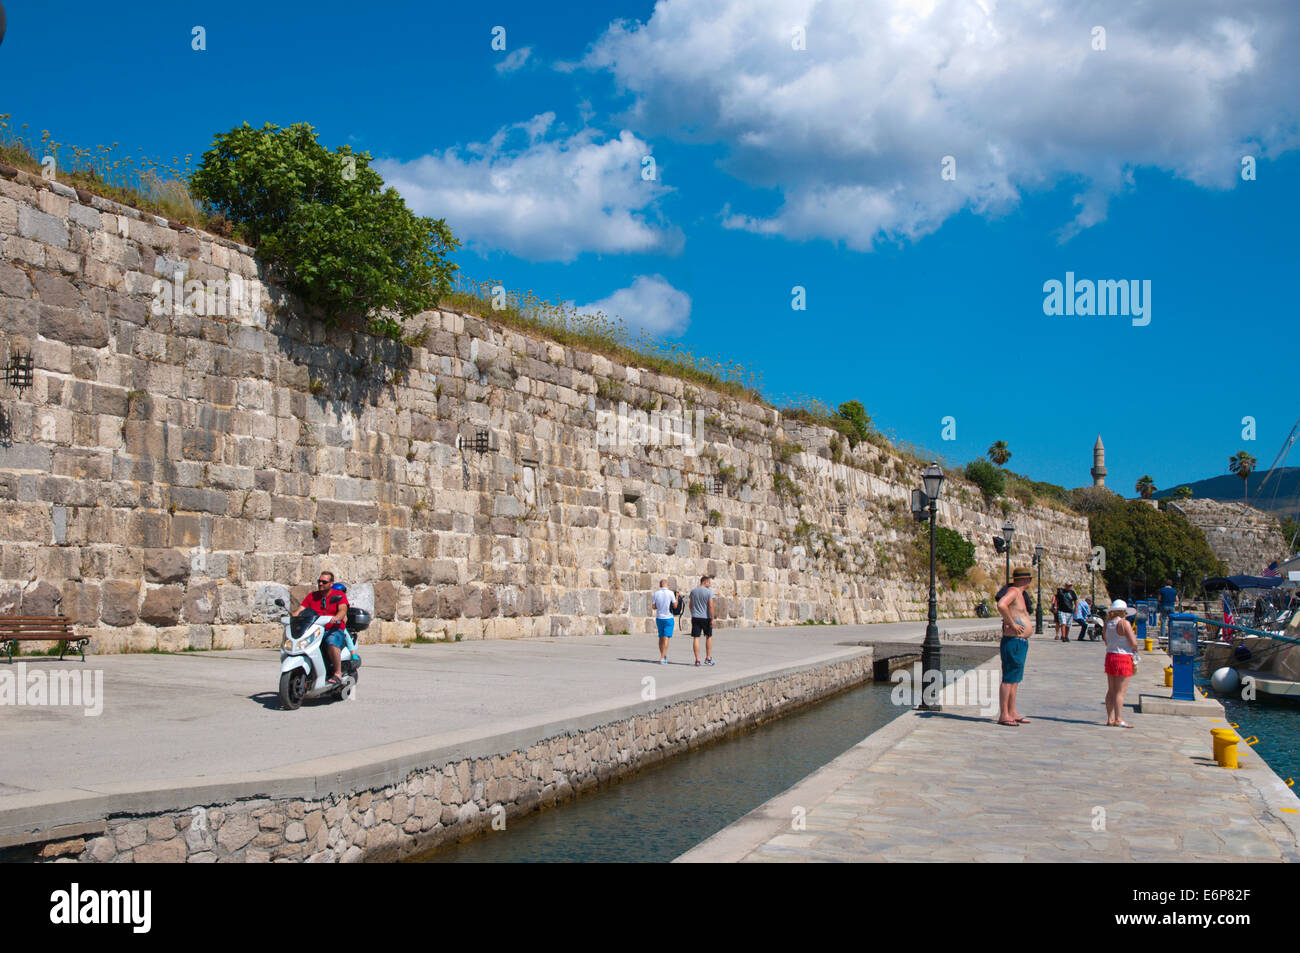 Traffic outside castle walls and the port, Kos town, Kos island, Dodecanese islands, South Aegean region, Greece, Europe Stock Photo